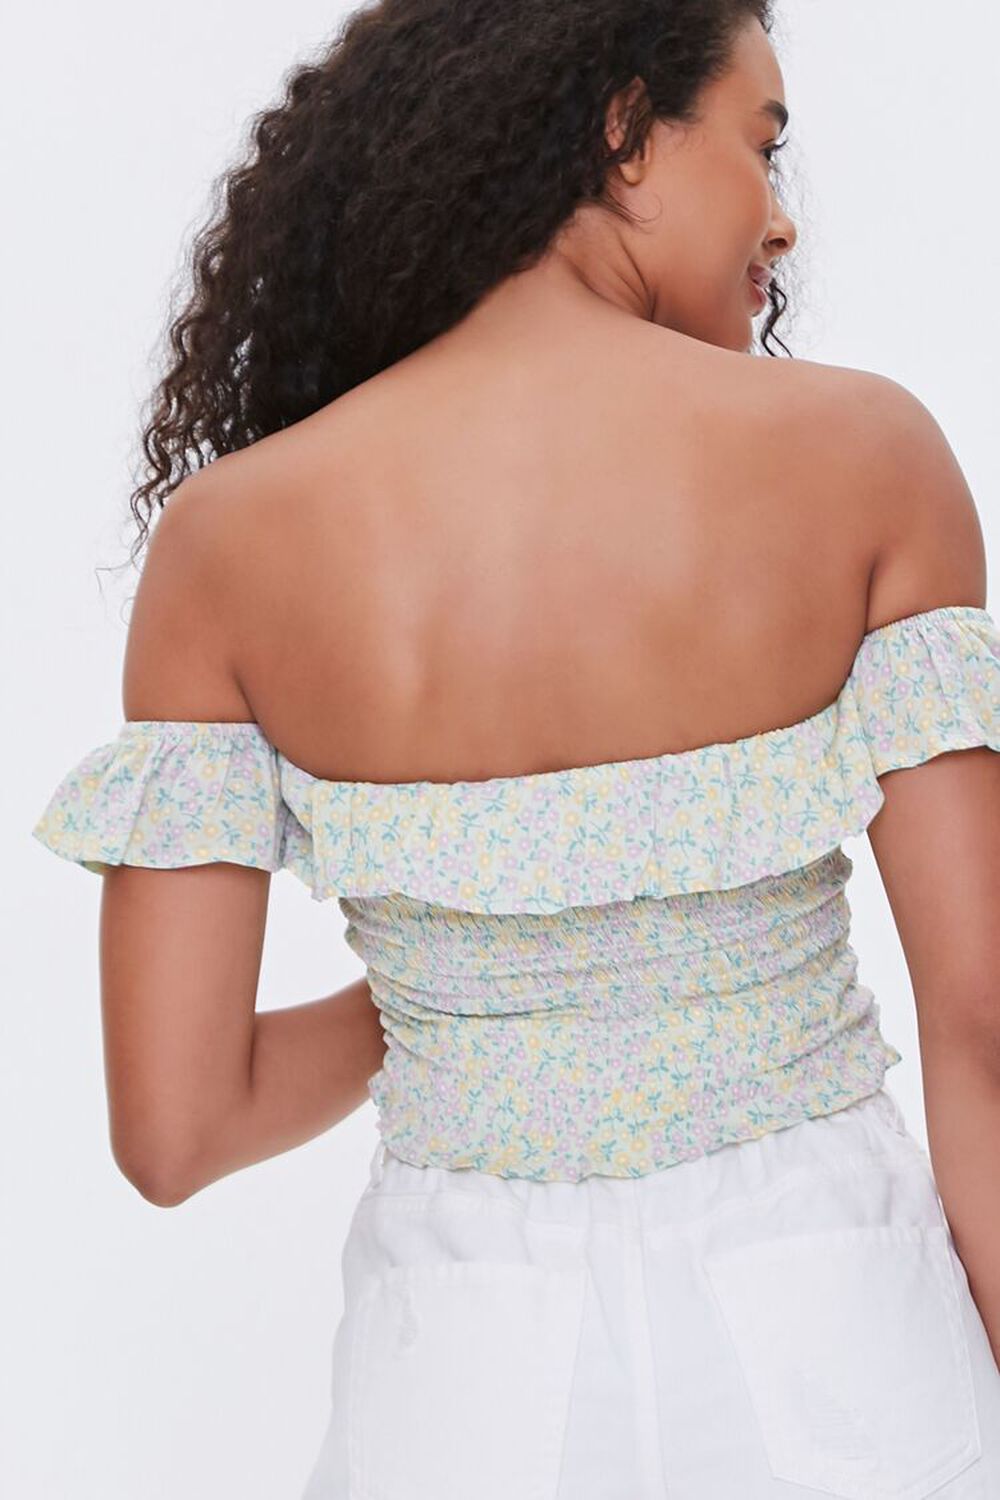 LIGHT YELLOW/MULTI Floral Print Off-the-Shoulder Top, image 3